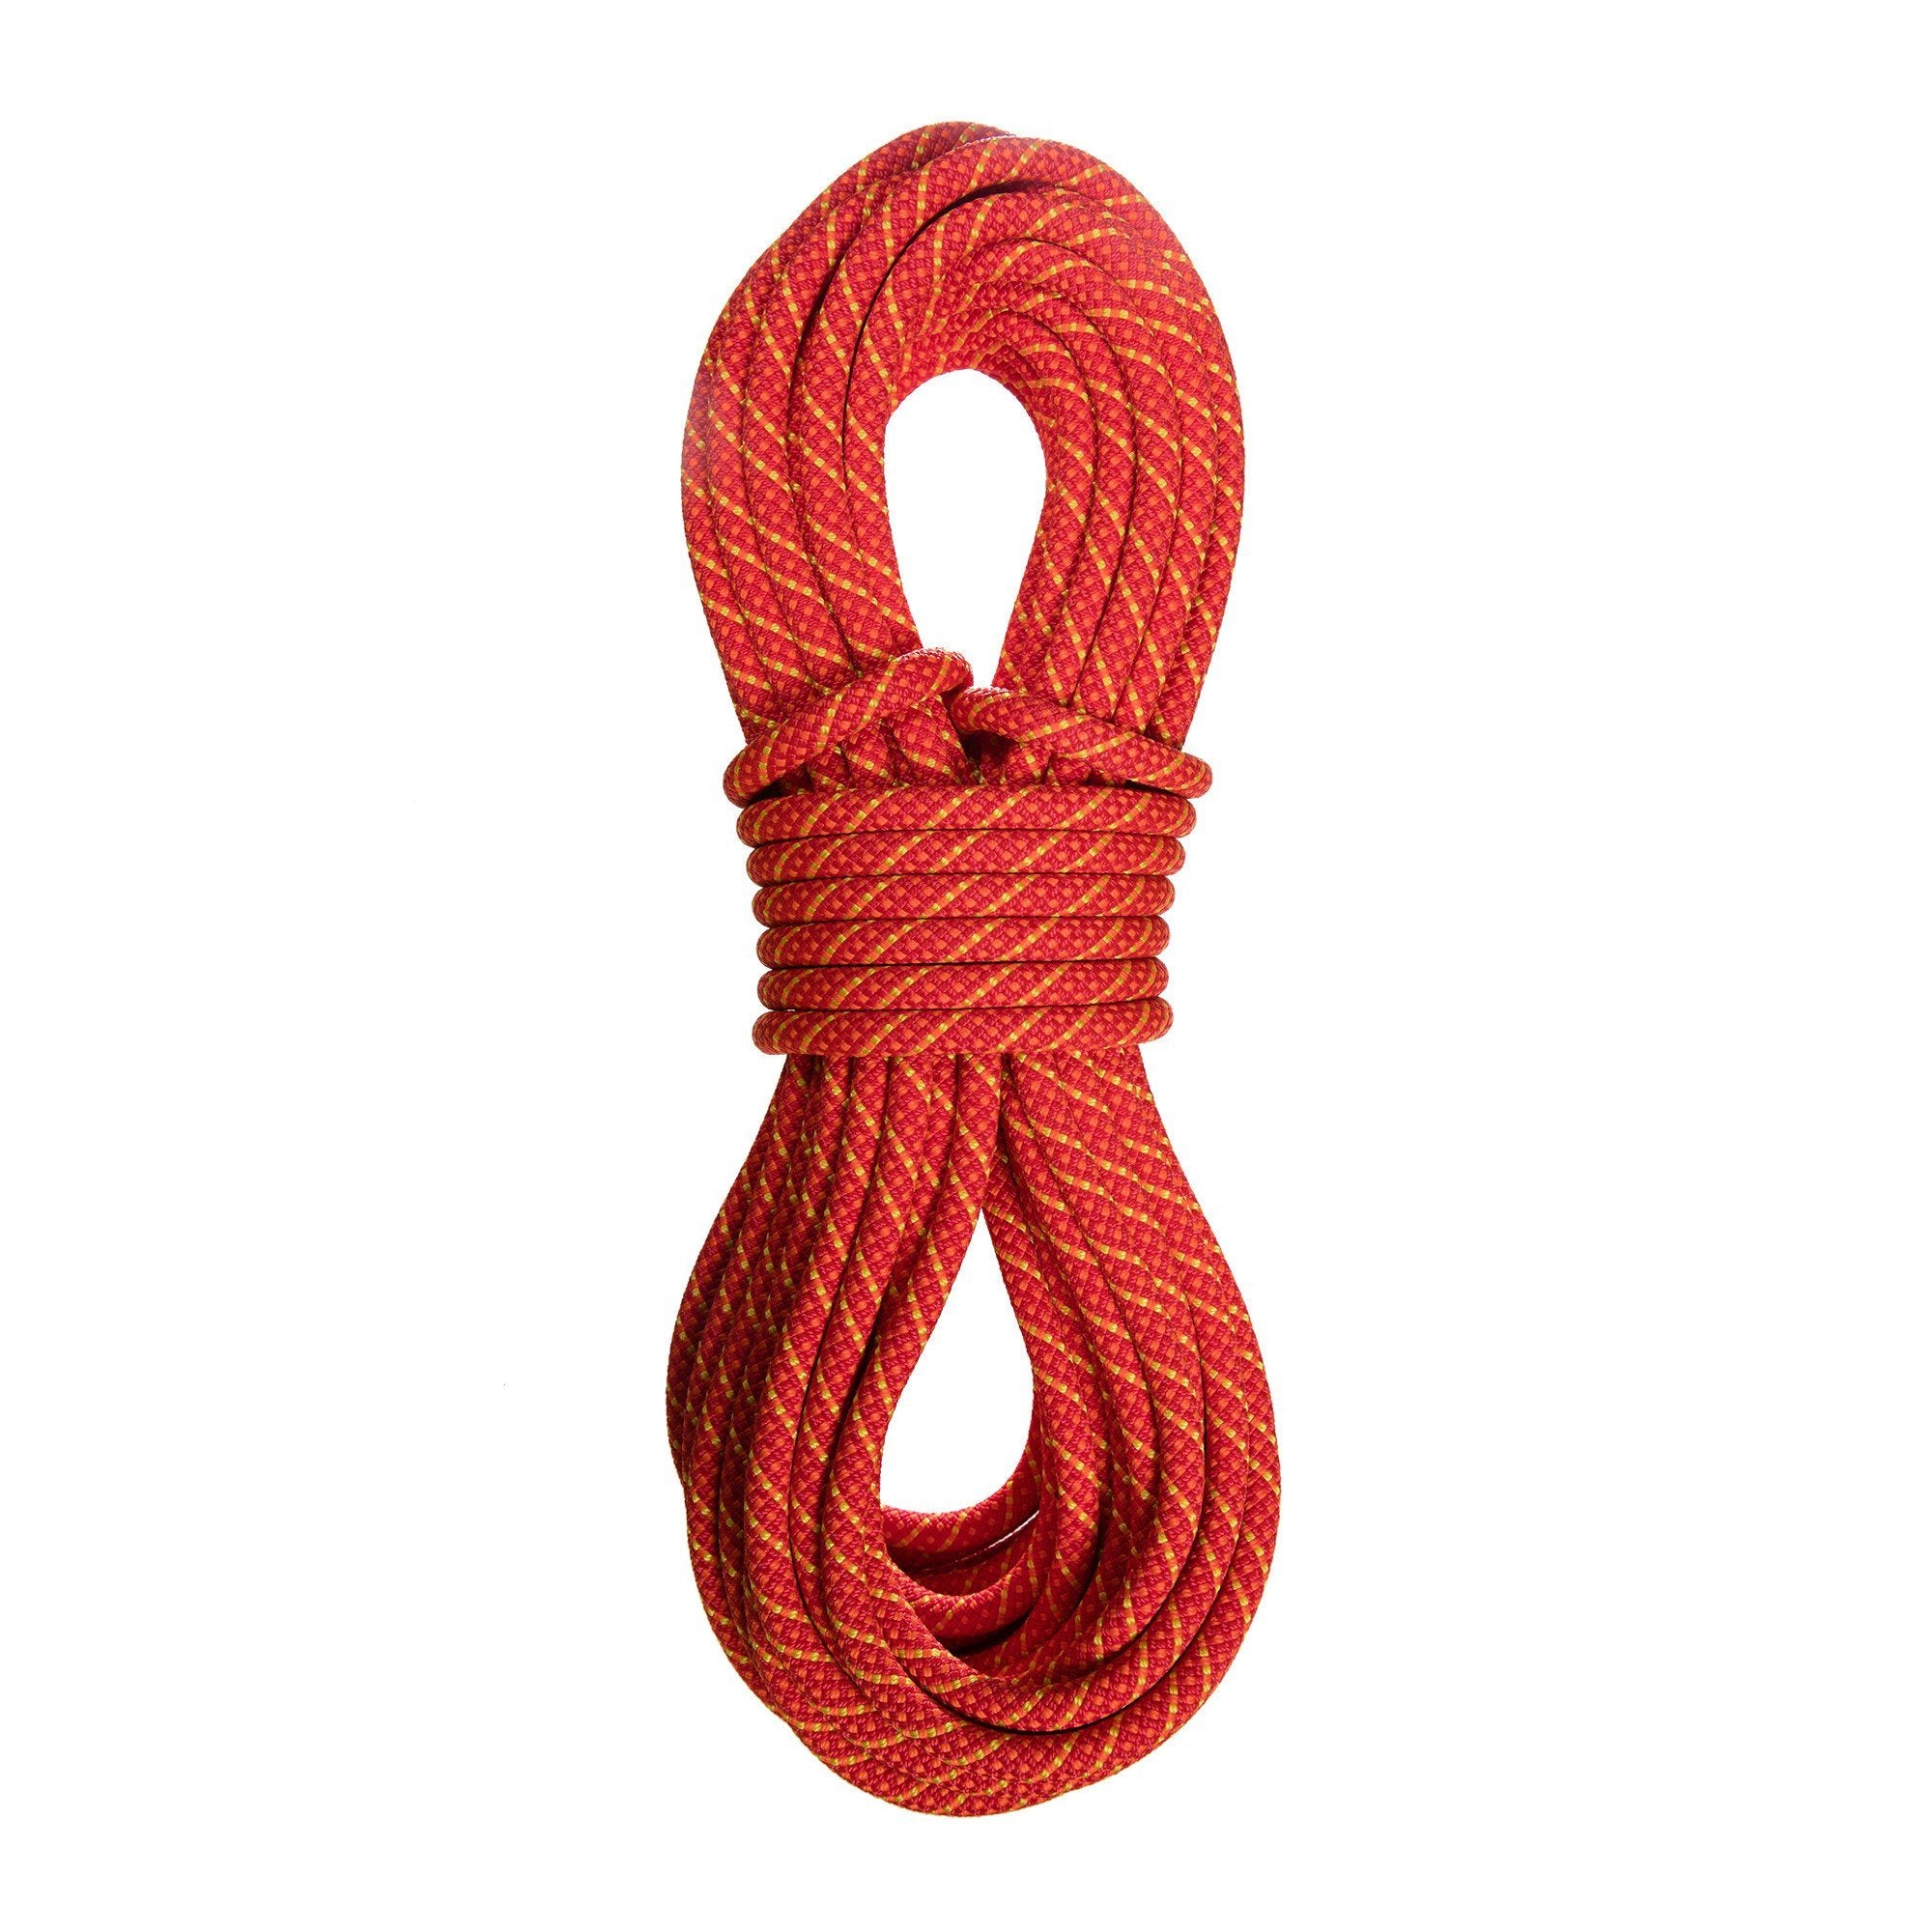 Sterling Rope Rope Tarp Plus with Pocket